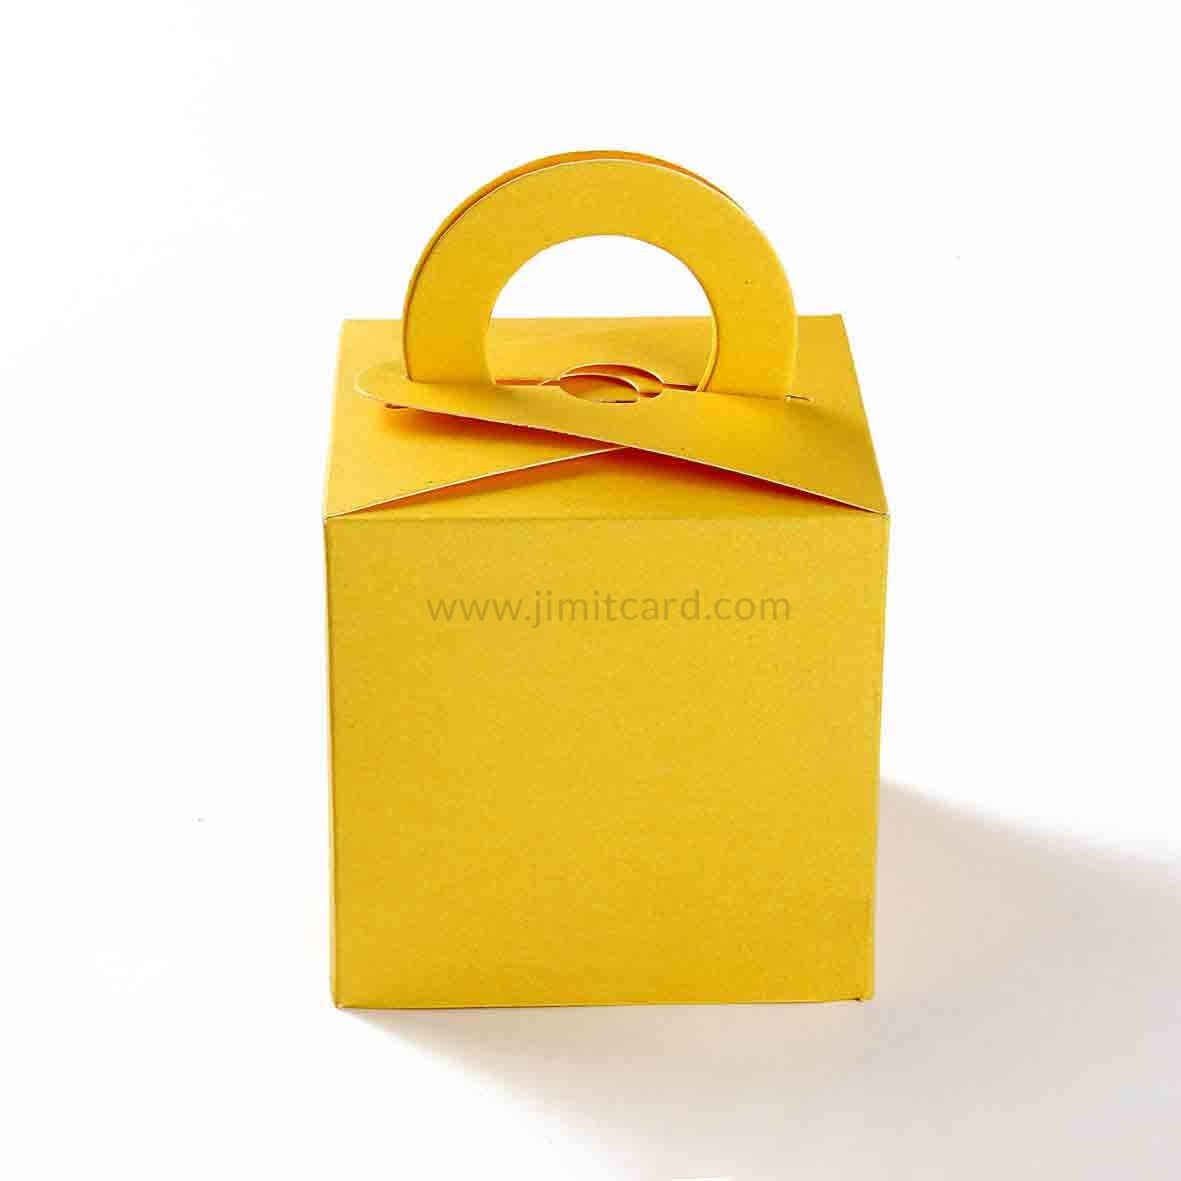 Square Wedding Party Favor Box in Yellow with a Holder